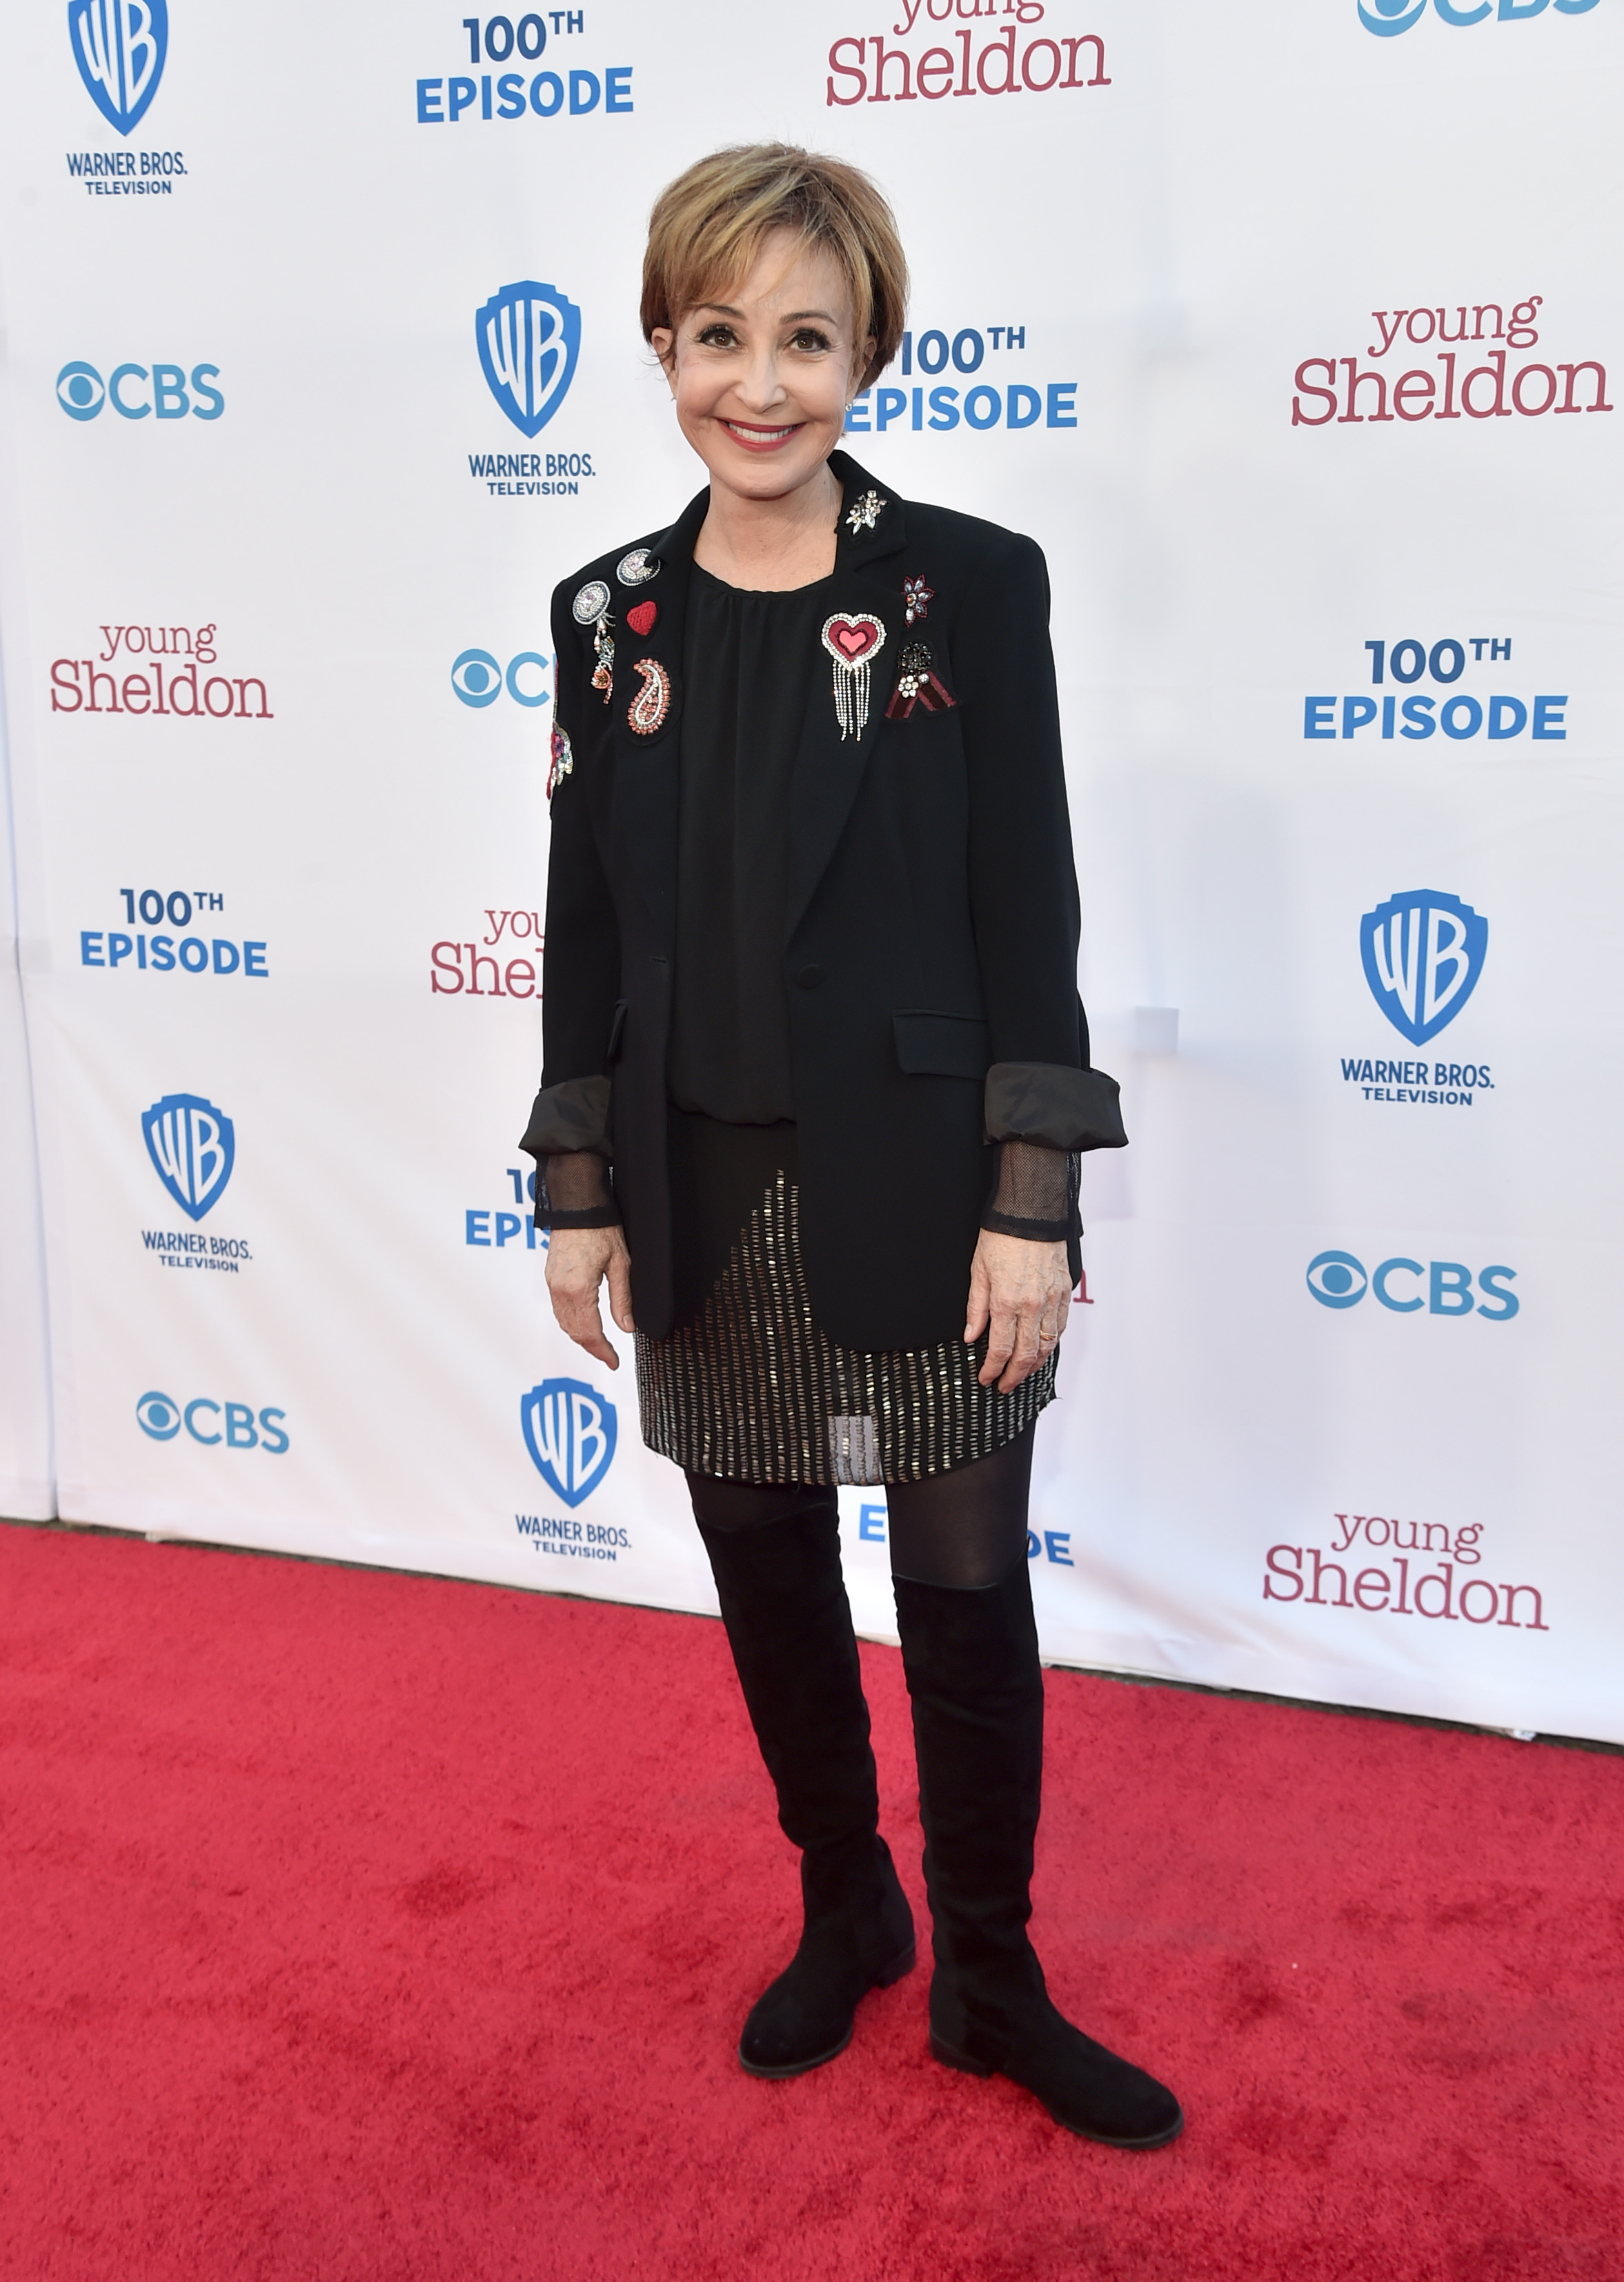 Annie Potts attends the premiere of the 100th Episode of "Young Sheldon" on March 18, 2022 | Source: Getty Images